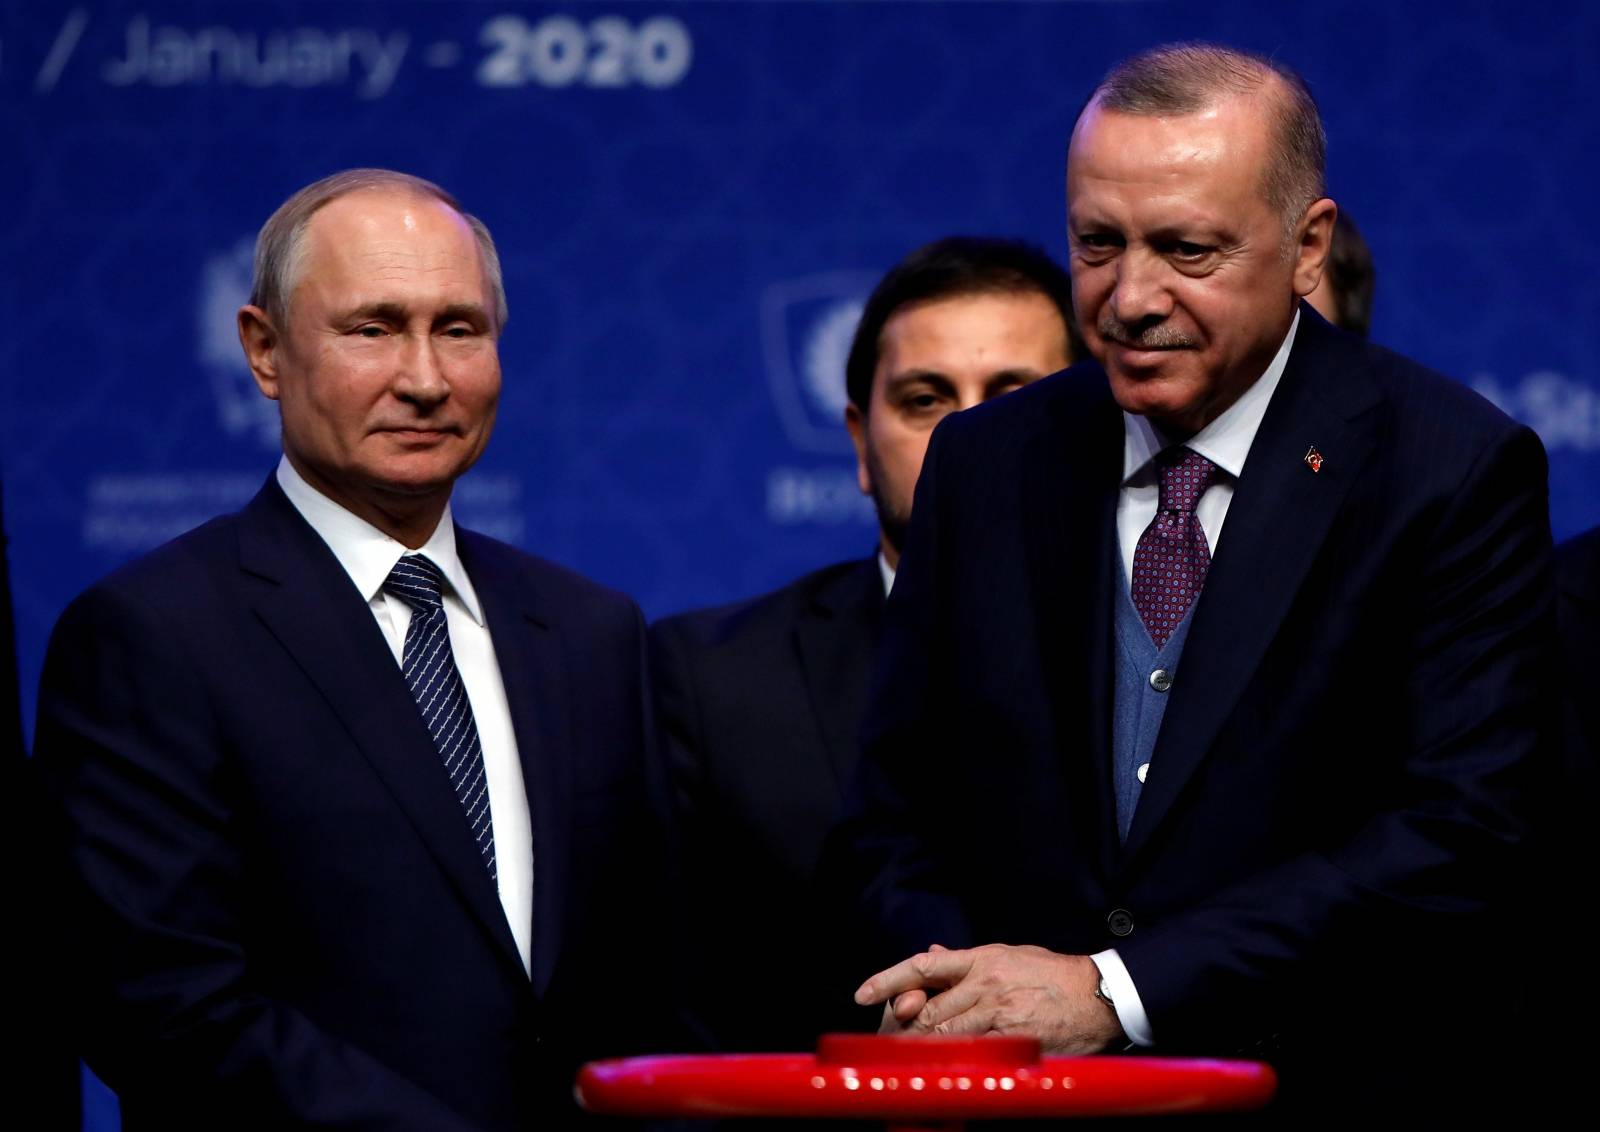 Turkish President Tayyip Erdogan and Russian President Vladimir Putin attend a ceremony marking the formal launch of the TurkStream pipeline which will carry Russian natural gas to southern Europe through Turkey